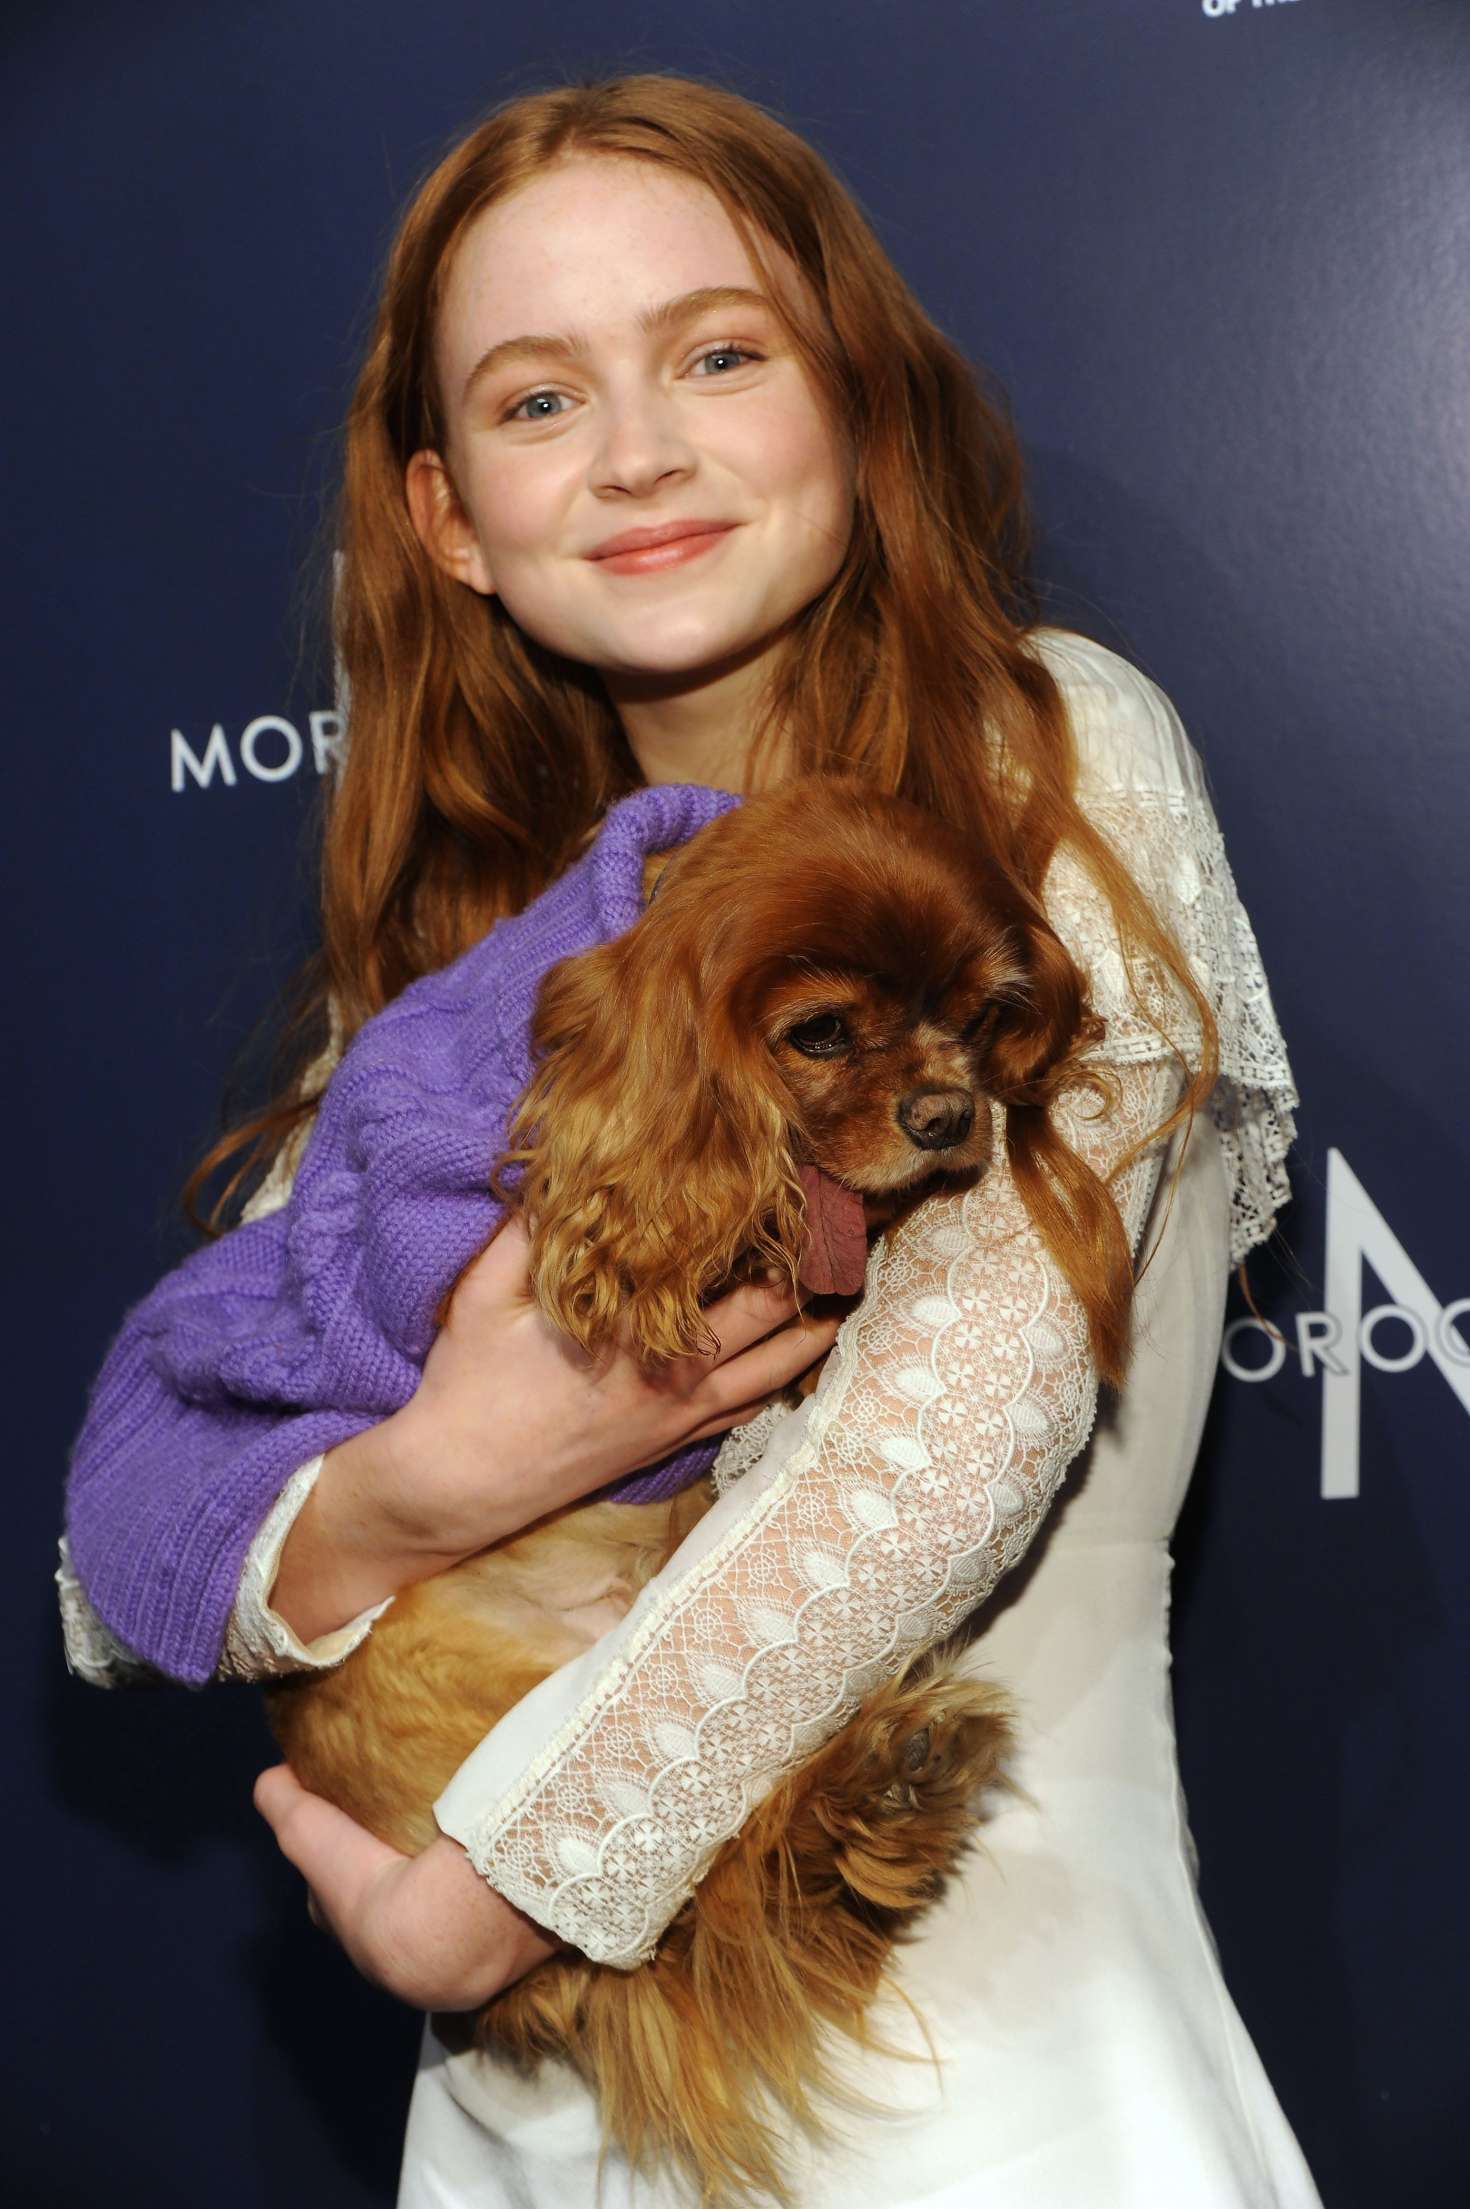 Sadie Sink - Humane Society Of The United States To The Rescue! Gala in NY